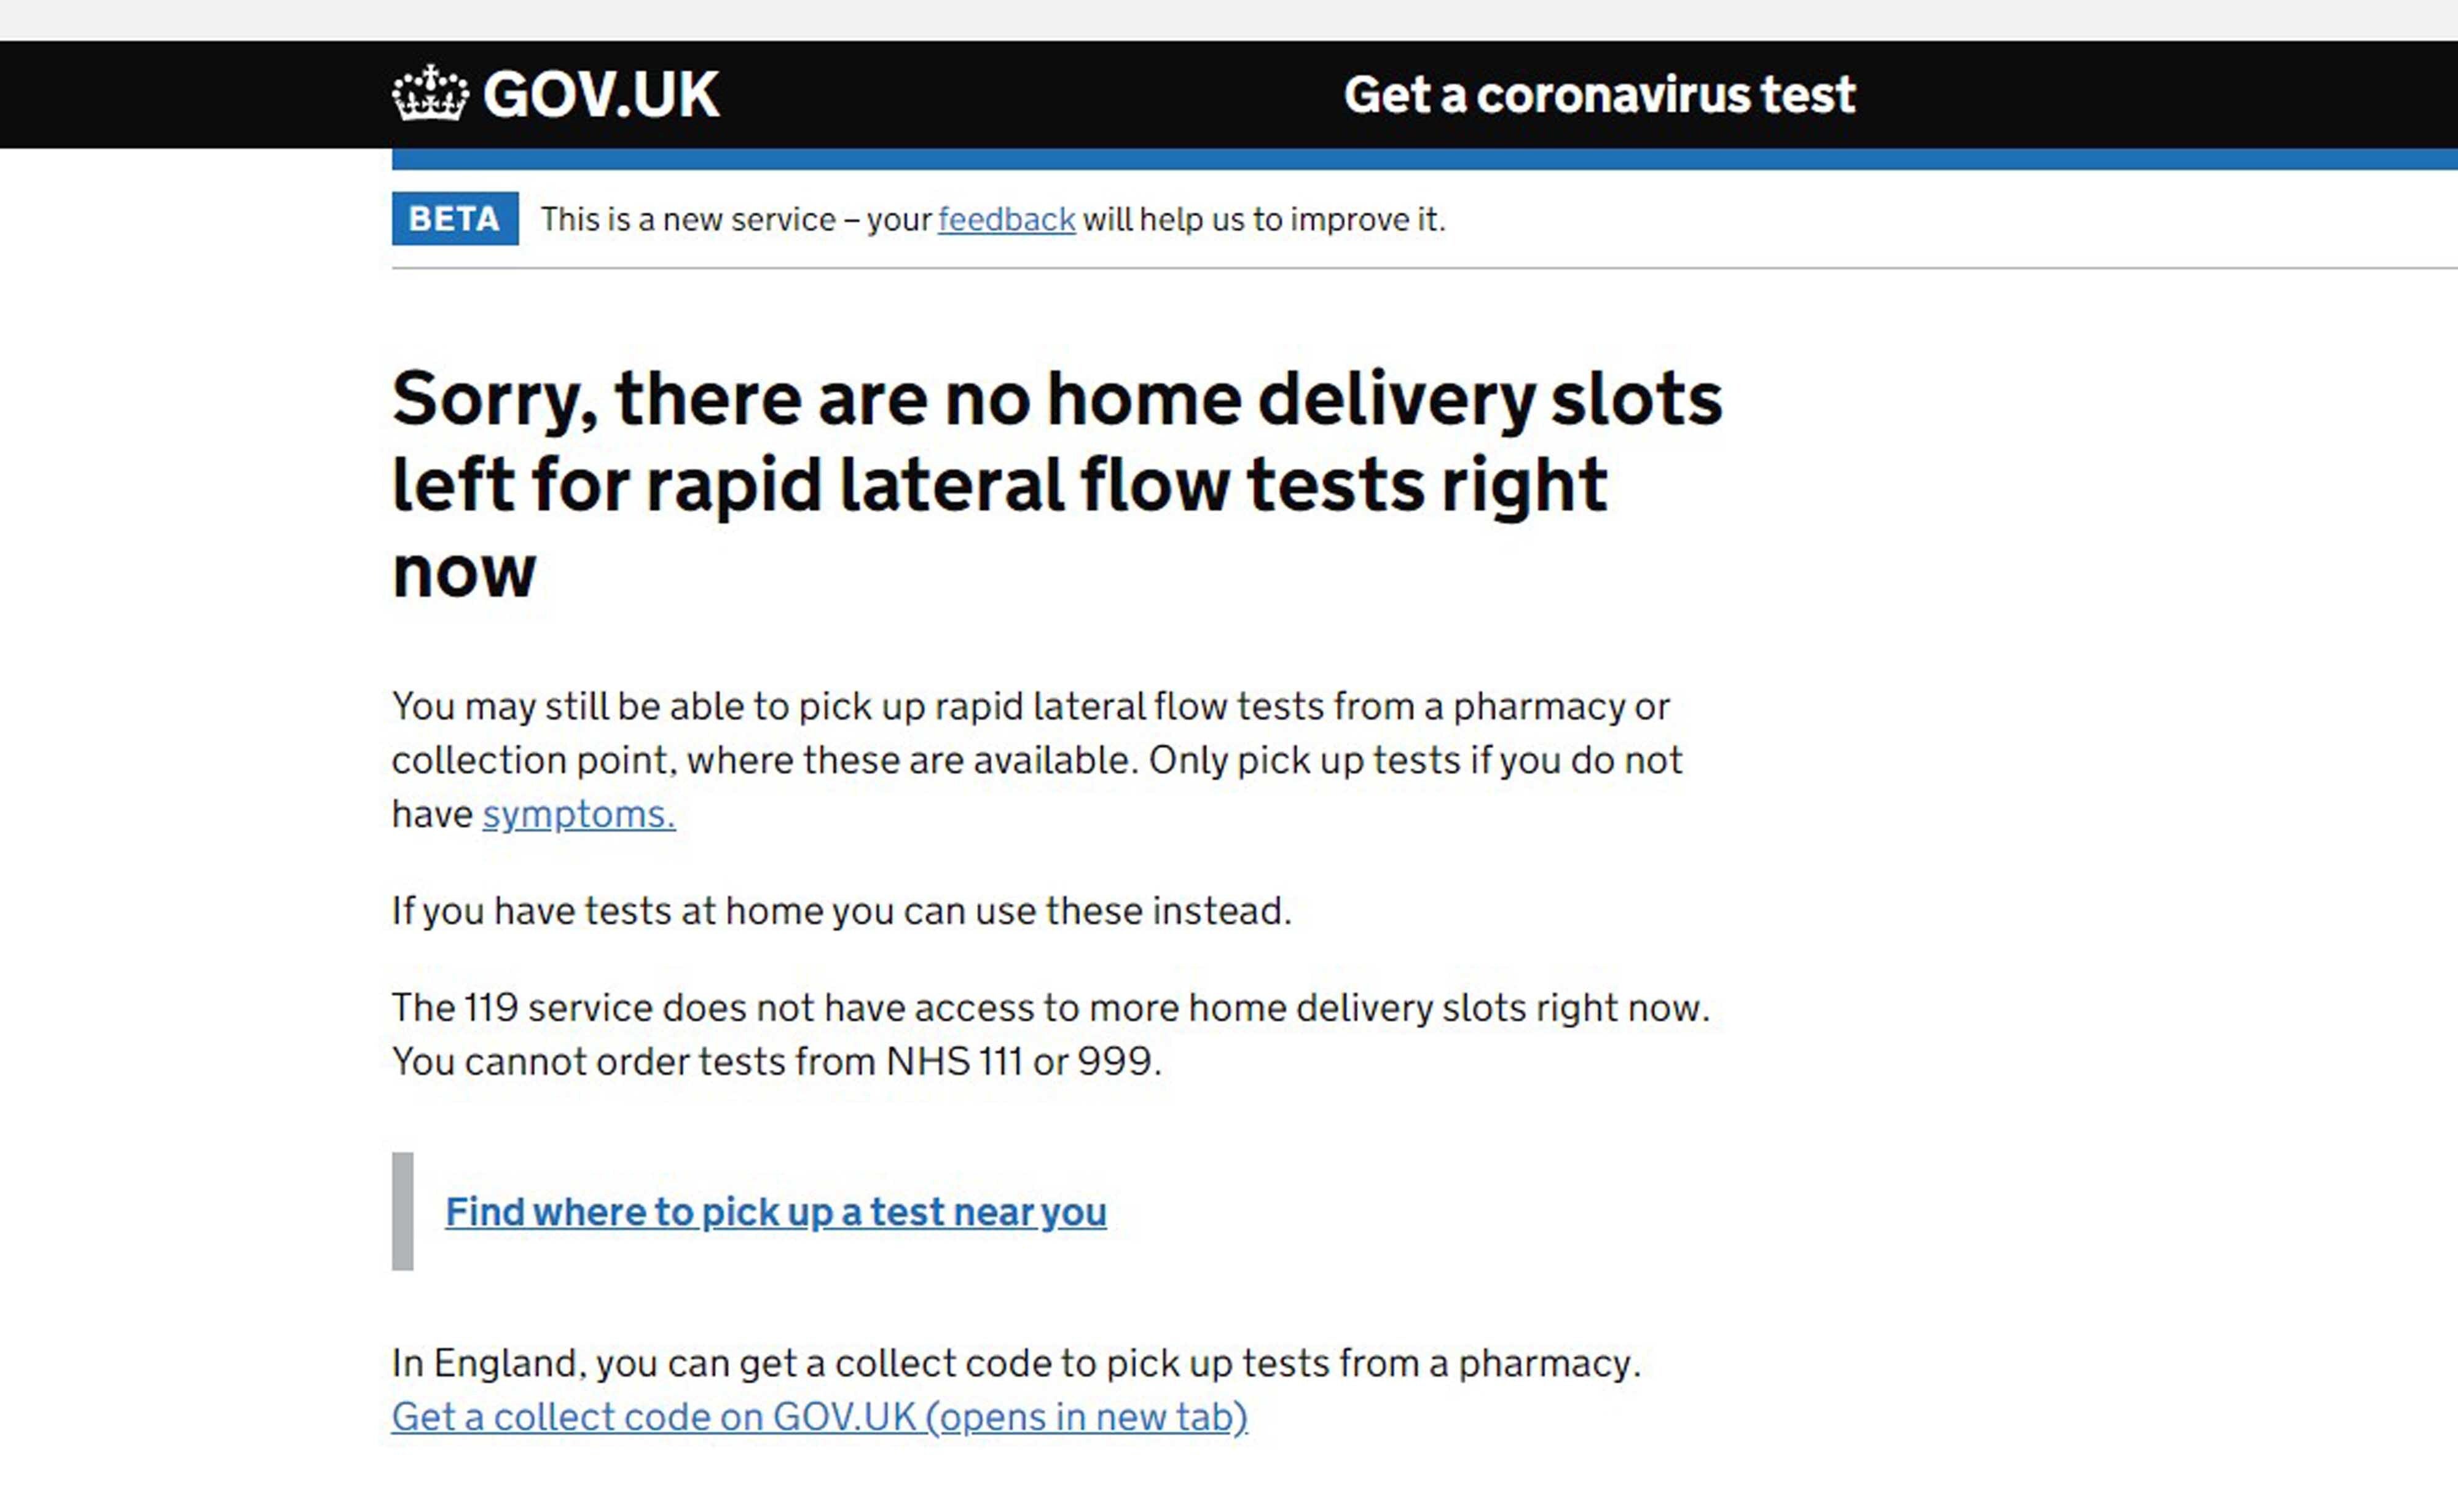 (Screengrab from the UK Government website)